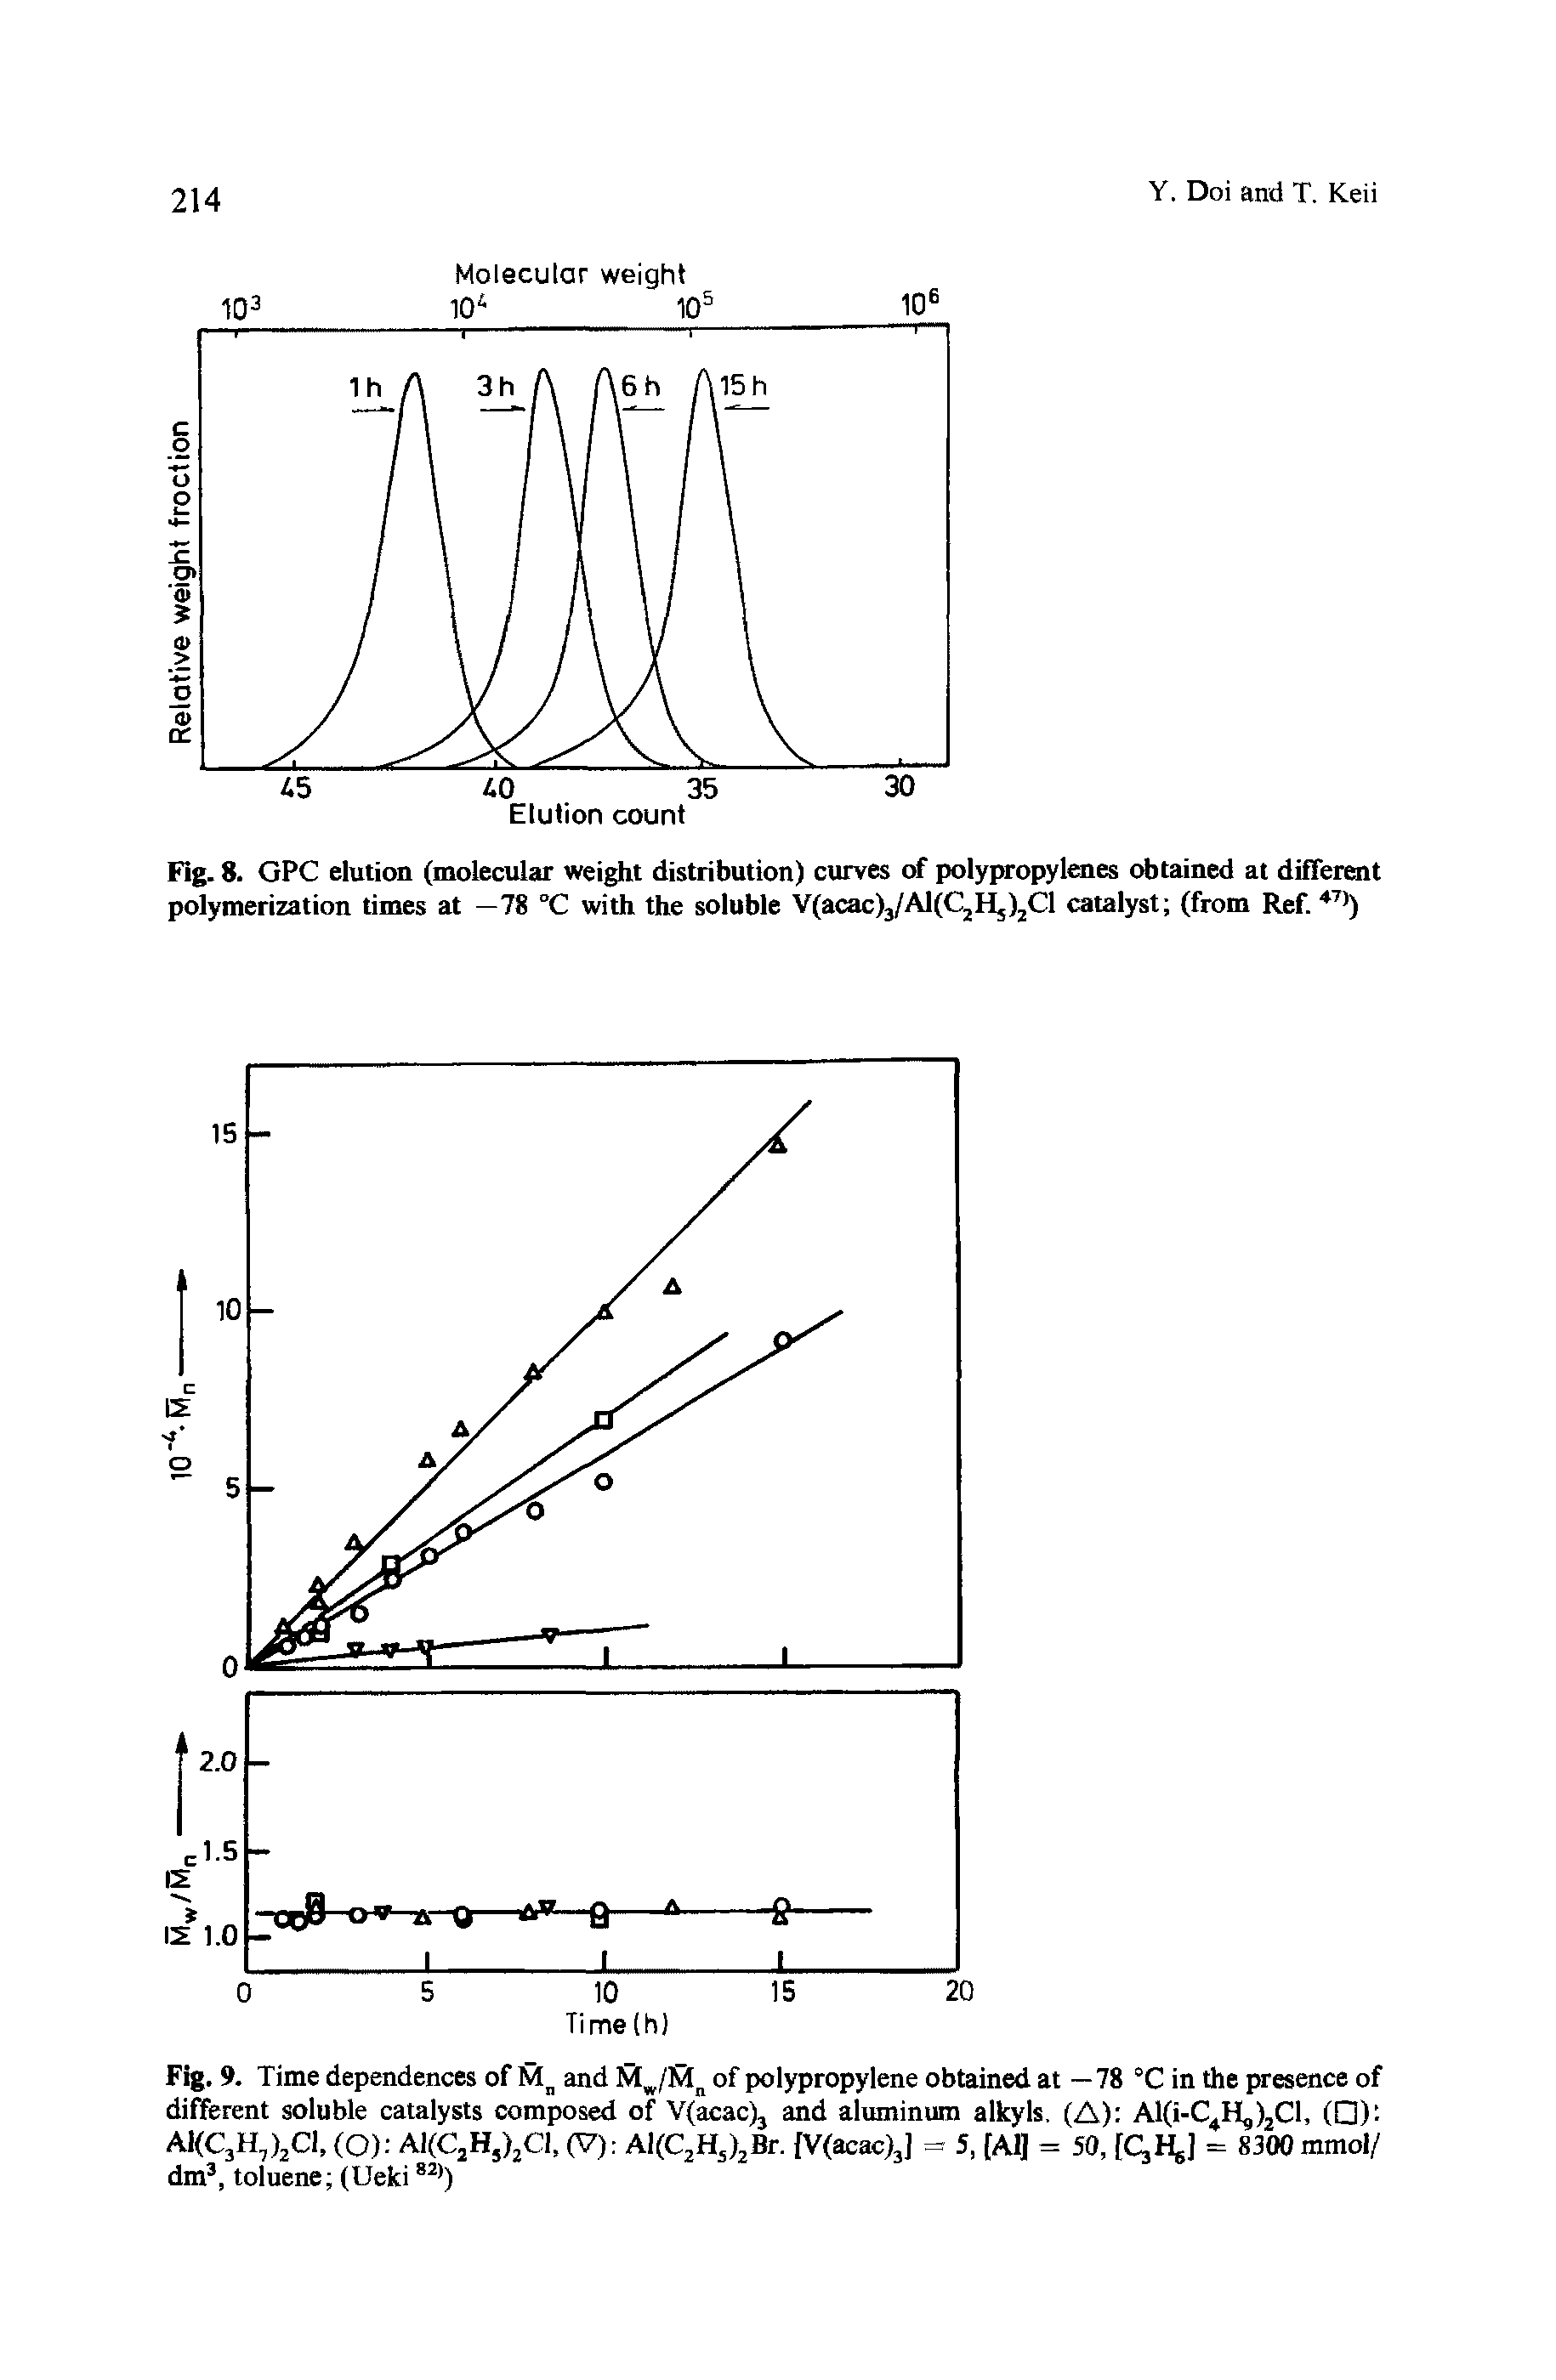 Fig. 8. GPC elution (molecular weight distribution) curves of polypropylenes obtained at different polymerization times at —78 °C with the soluble V(acac)3/A1(C2H5)2C1 catalyst (from Ref. 47))...